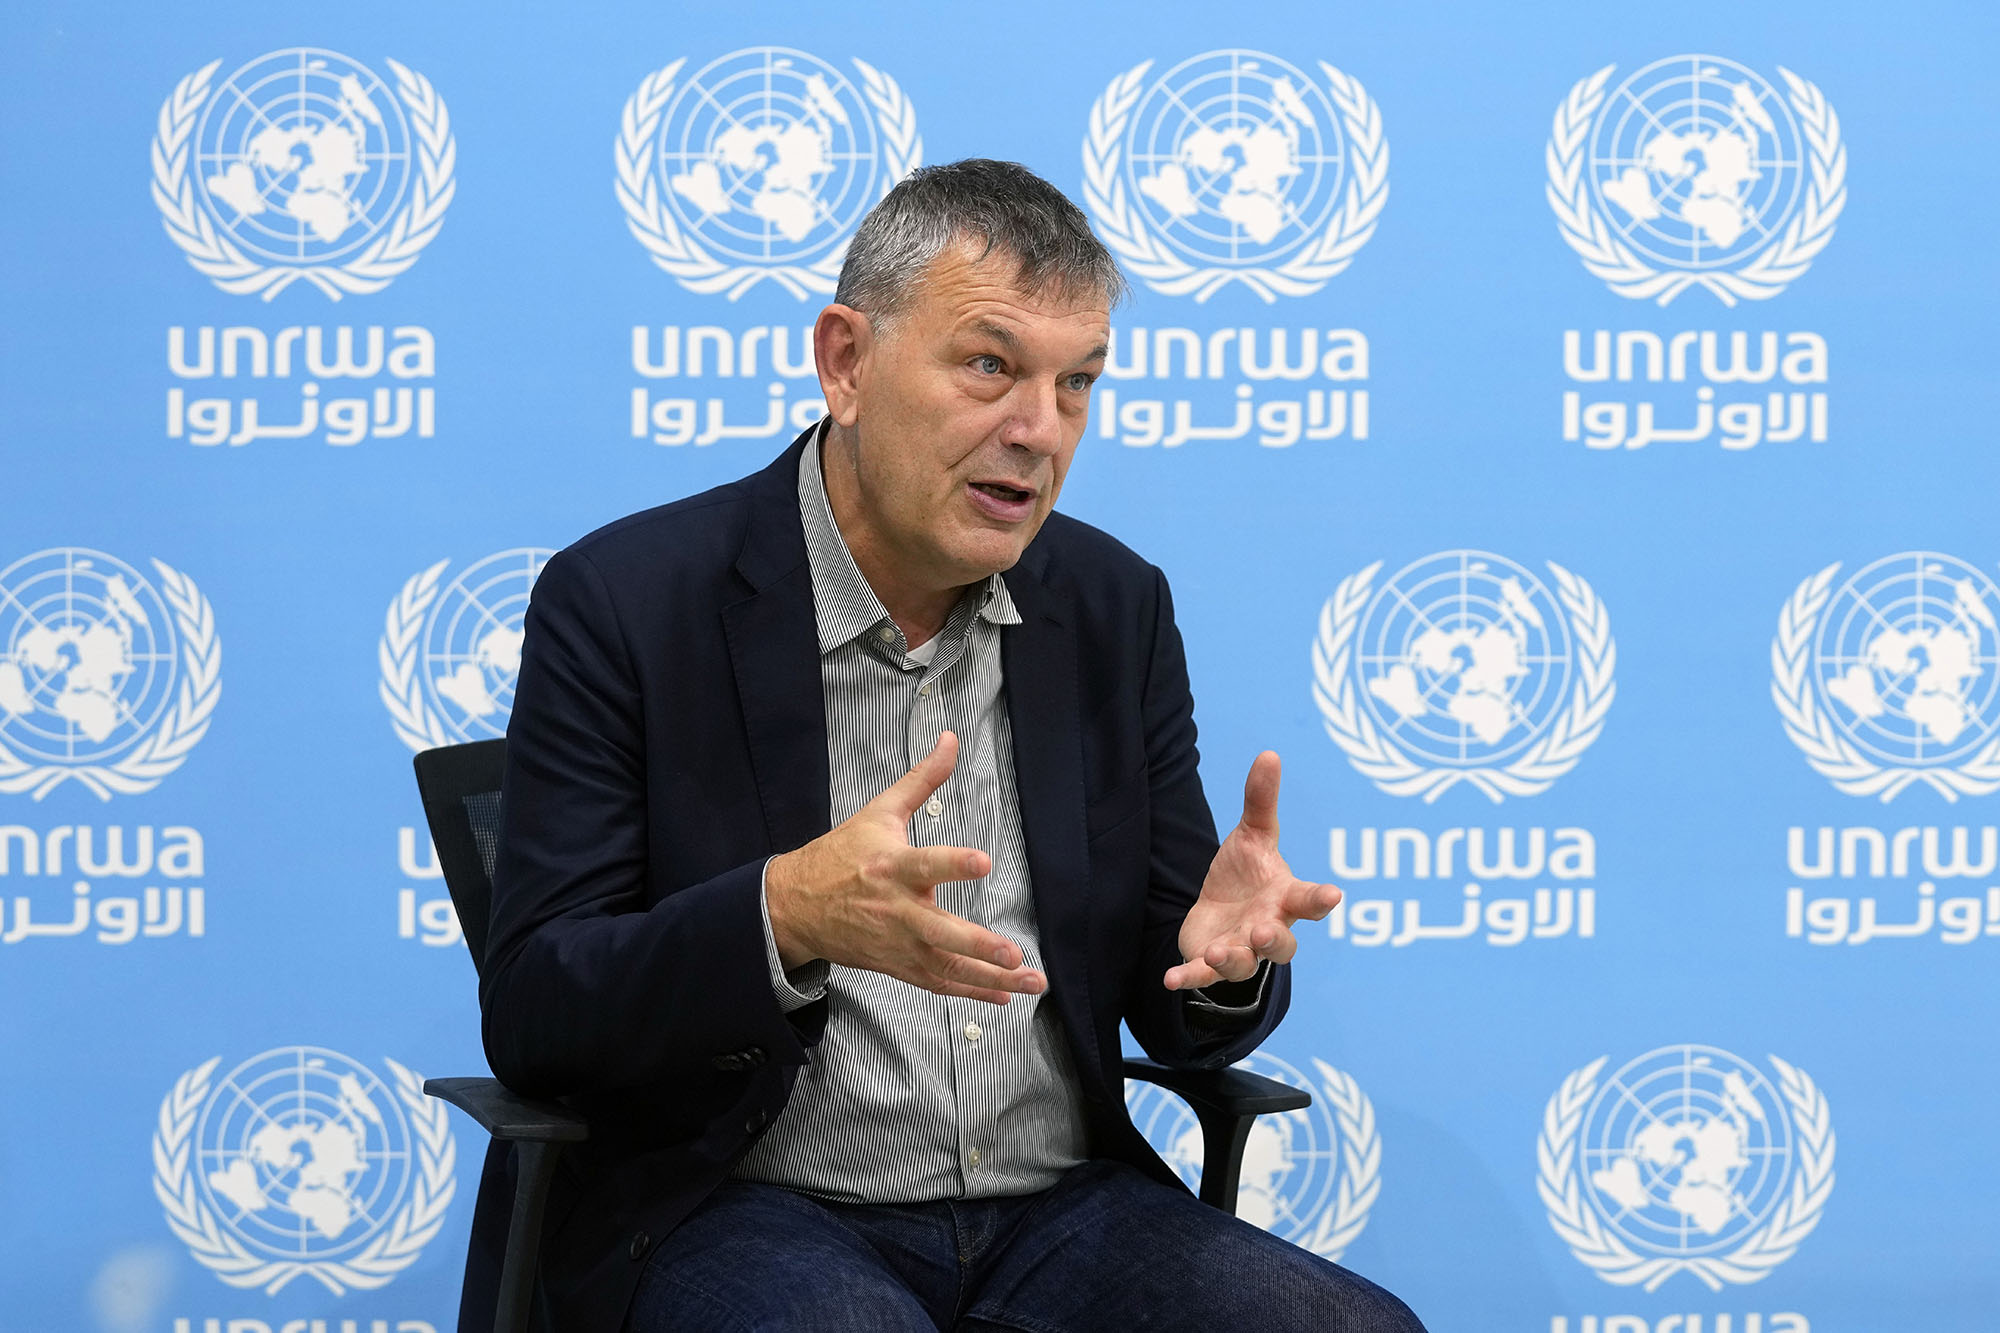 The Commissioner-General of the U.N. agency for Palestinian refugees, Philippe Lazzarini, speaks during an interview at the UNRWA headquarters in Beirut, Lebanon, on December 6.